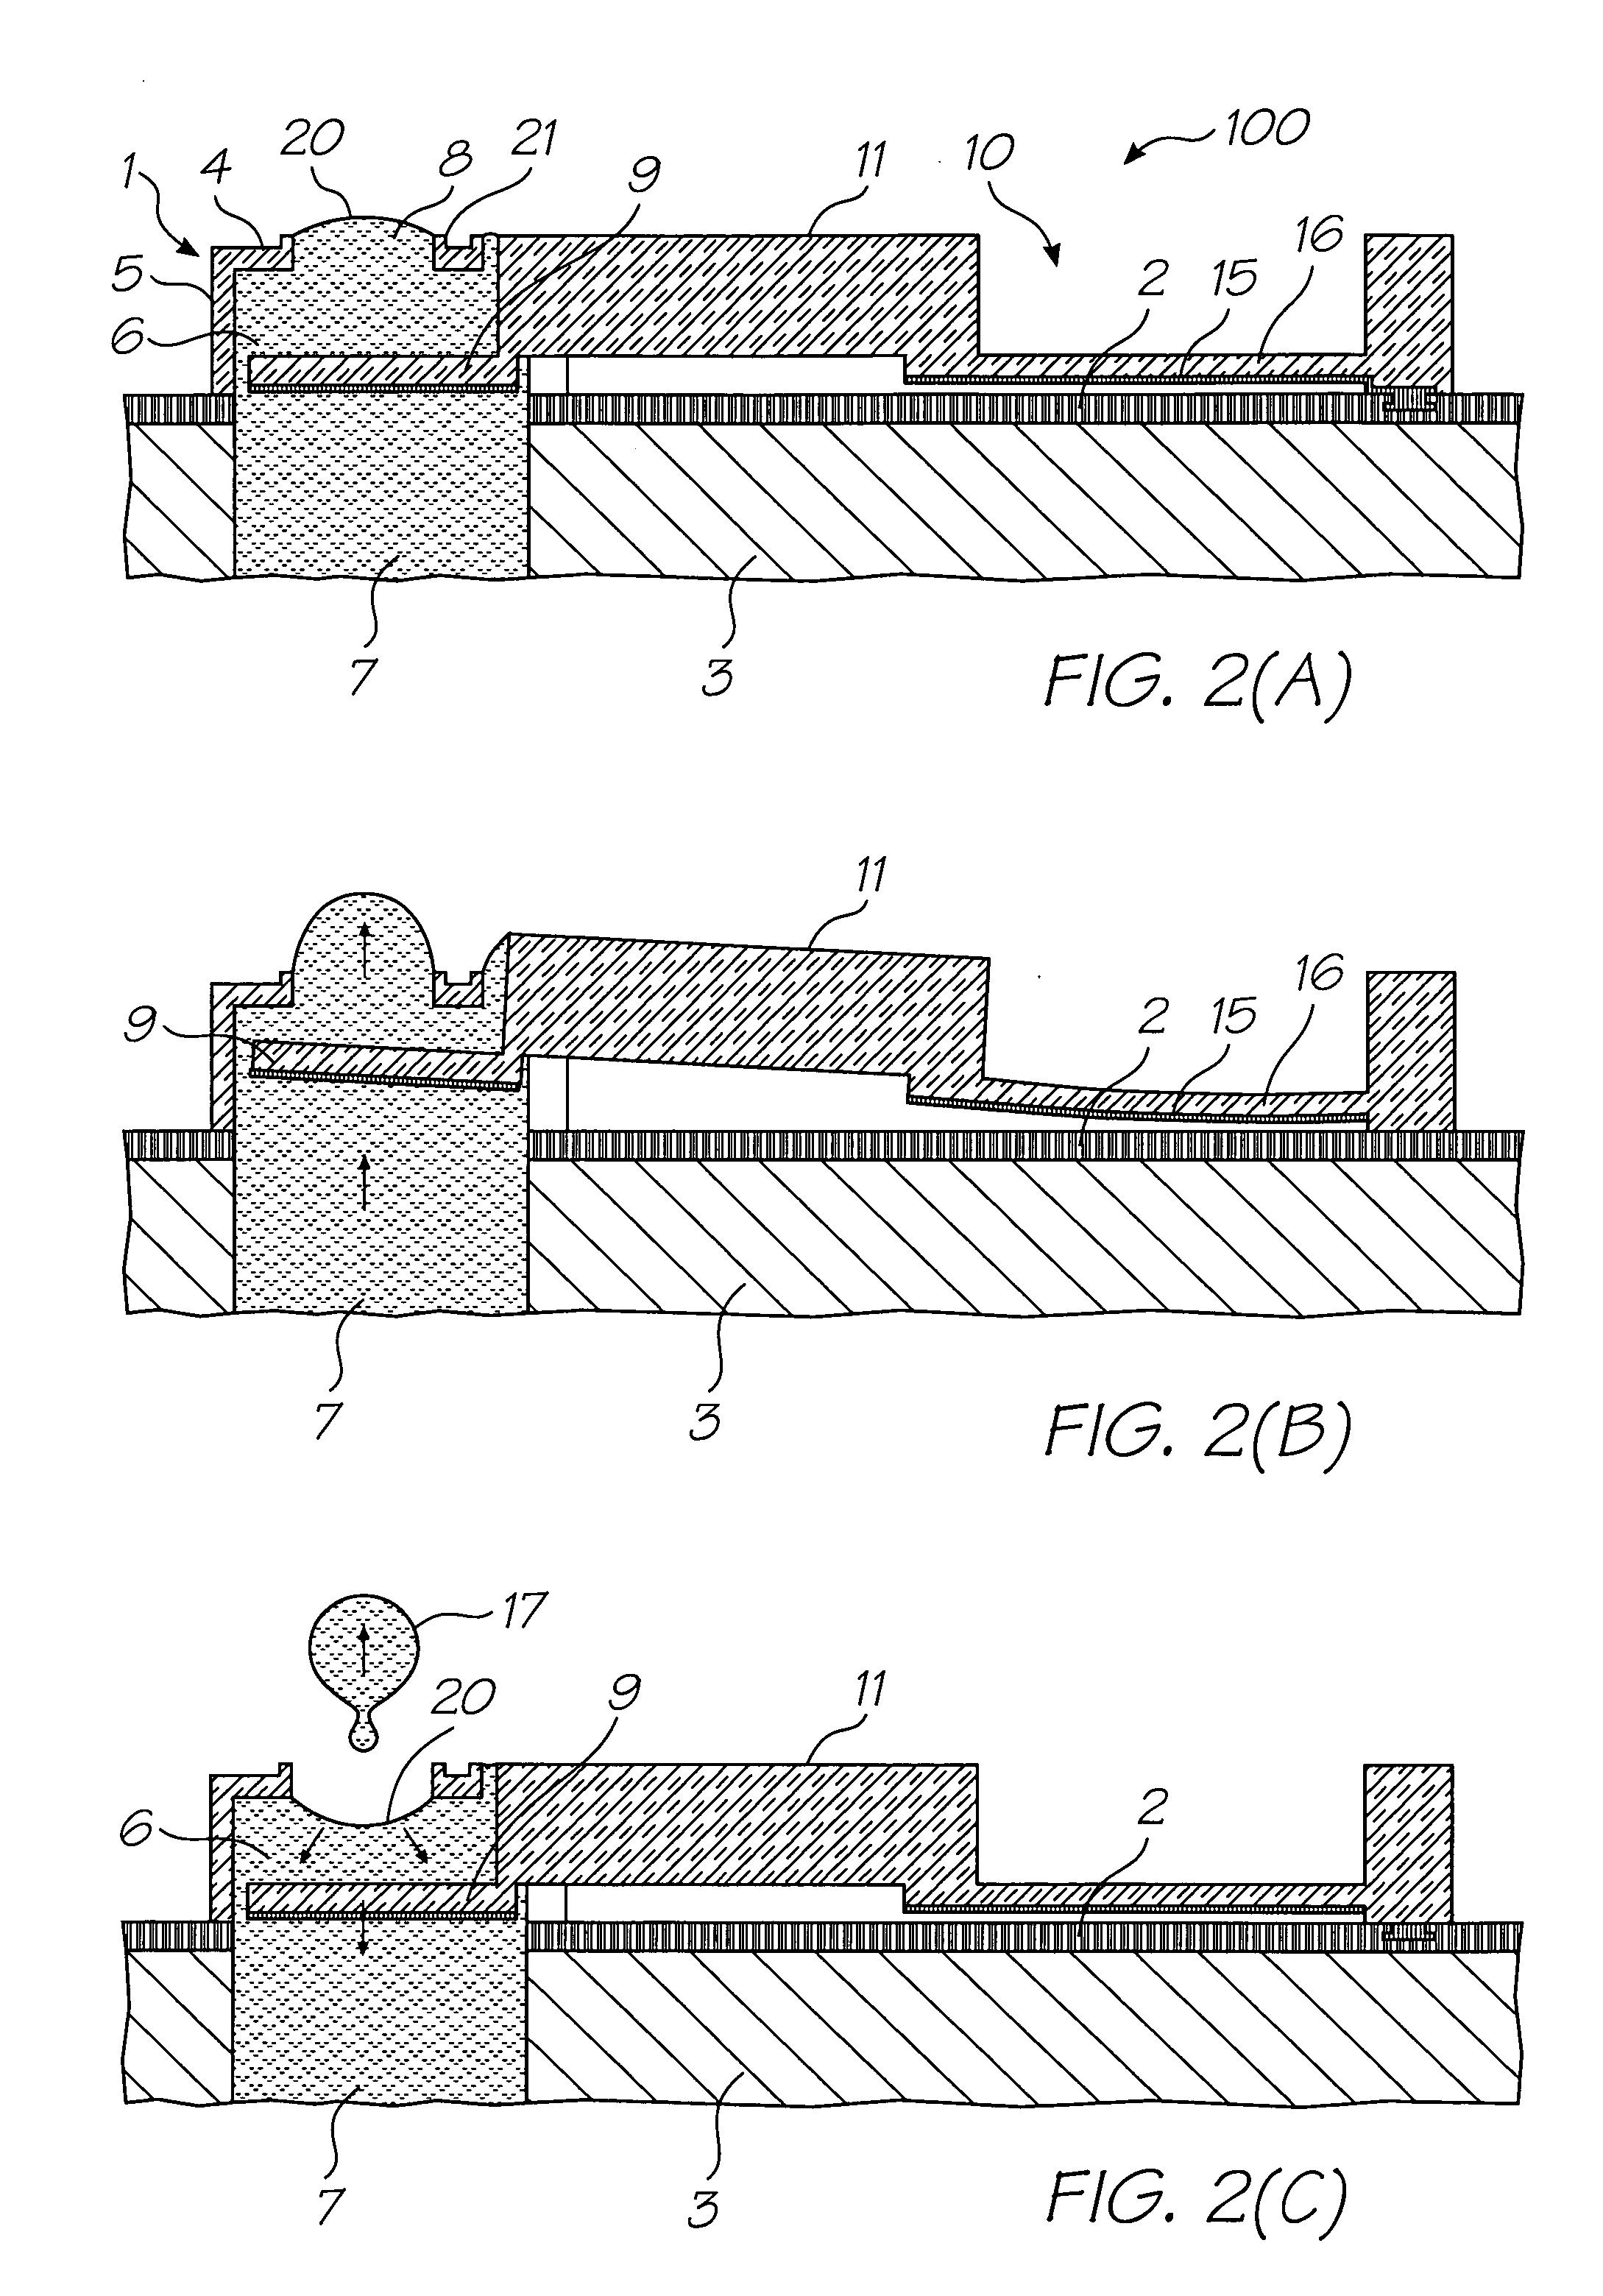 Inkjet nozzle assembly having thermal bend actuator with an active beam defining substantial part of nozzle chamber roof